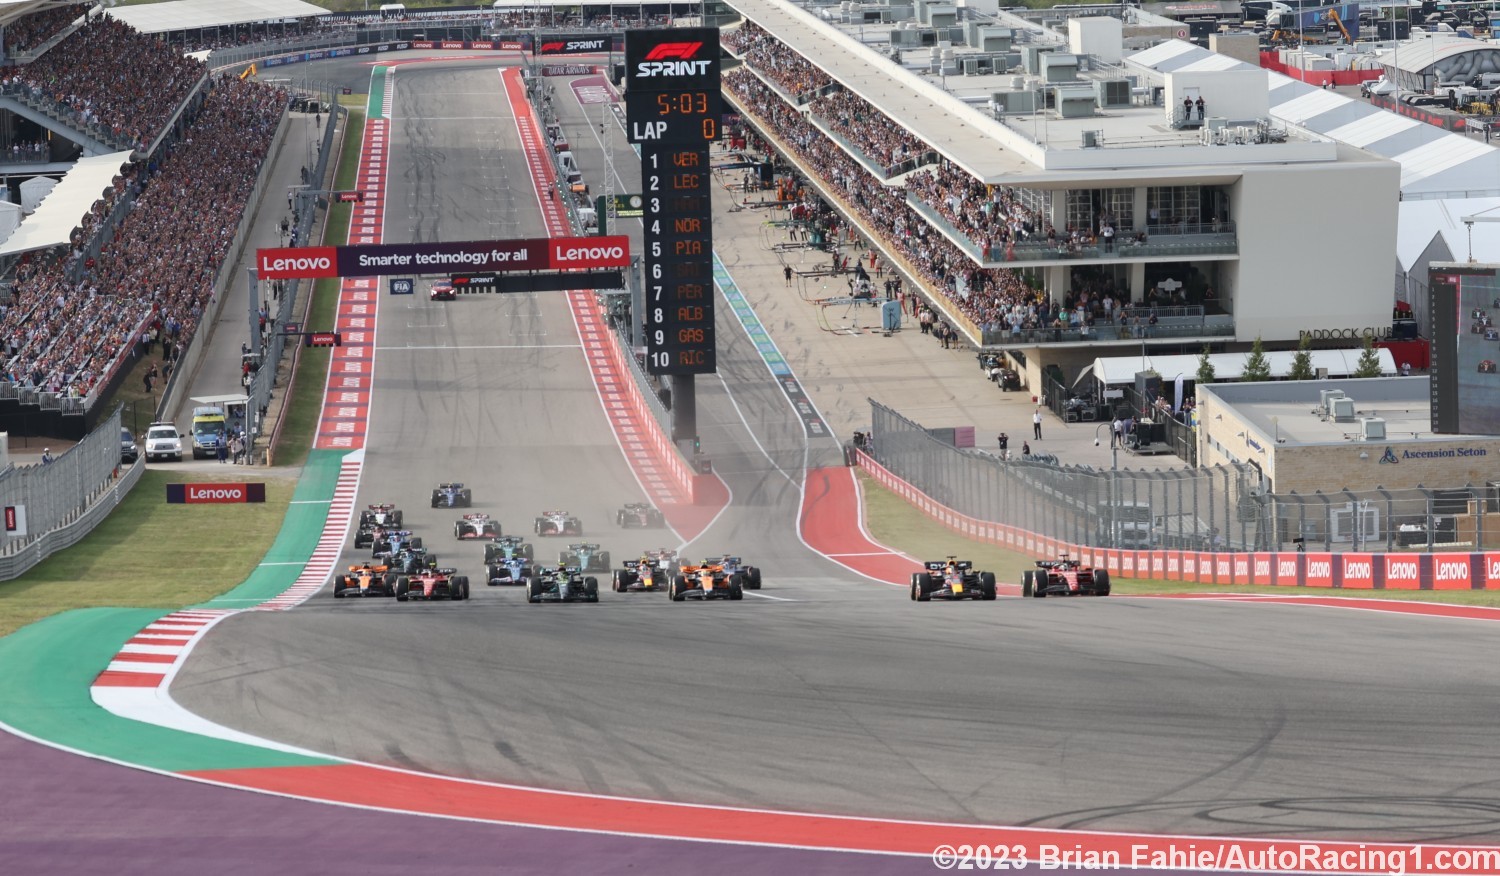 Max Verstappen squeezes Charles Leclerc down the inside into Turn 1 during the USGP Sprint Race